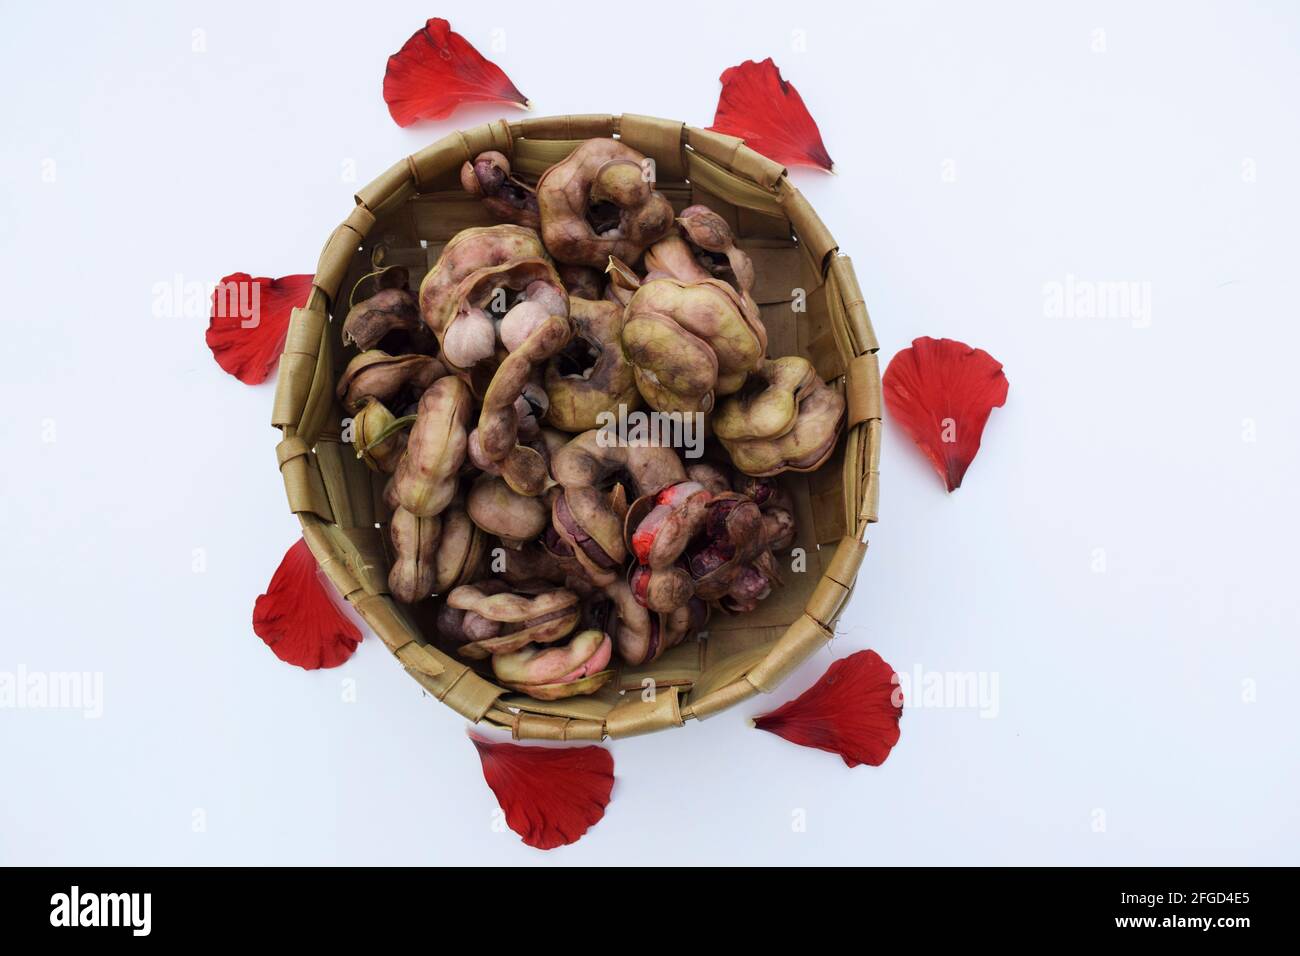 Manila tamaraind also known as chichbila or jungle jalebi, asian or african wild pink raw fruit with seeds. Round shaped tamarind like fruit. Stock Photo